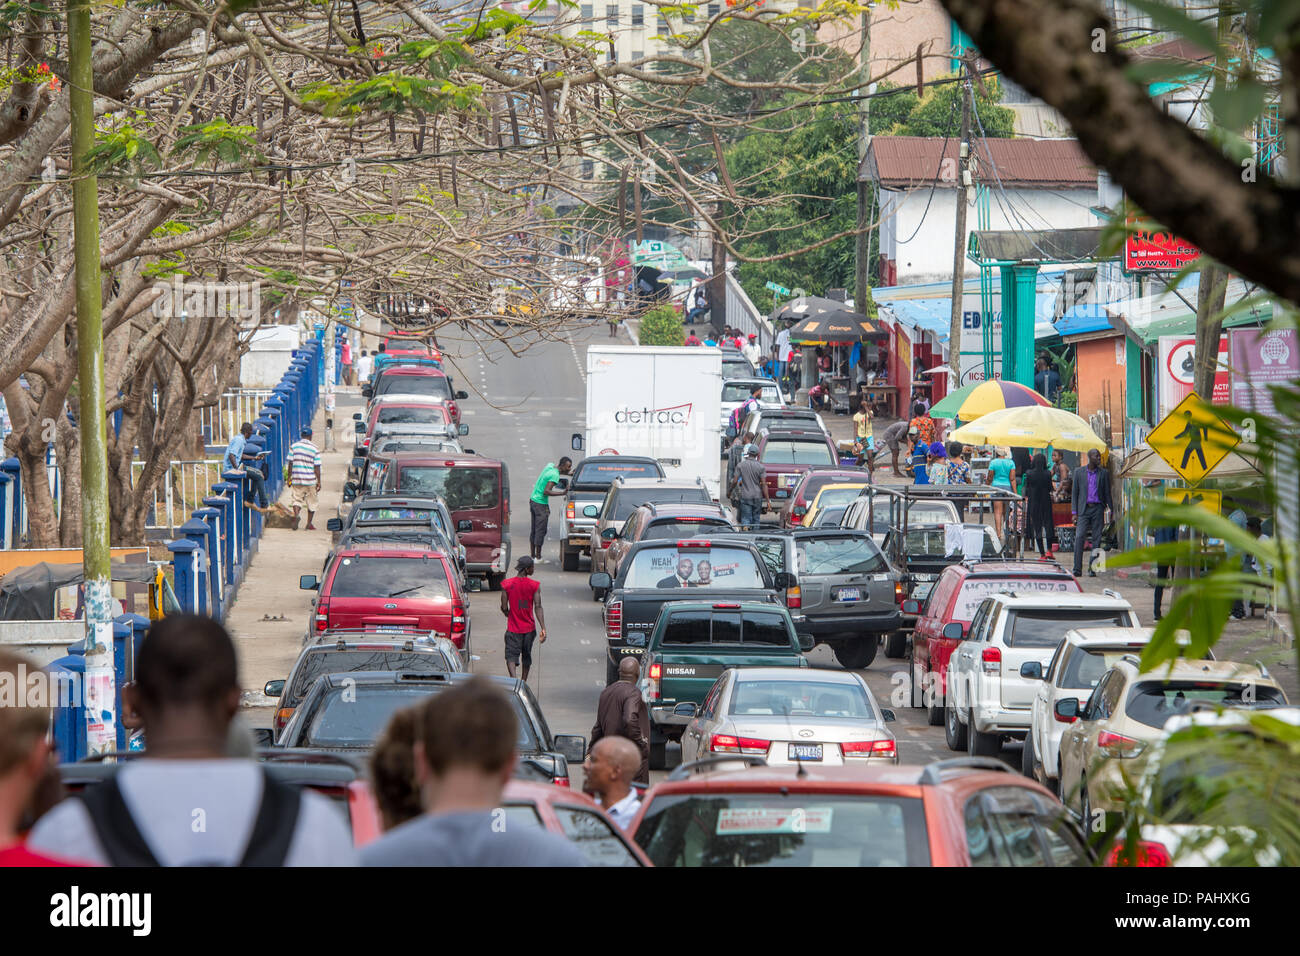 Cars drive down a crowded street in the bustling city of Monrovia, Liberia Stock Photo